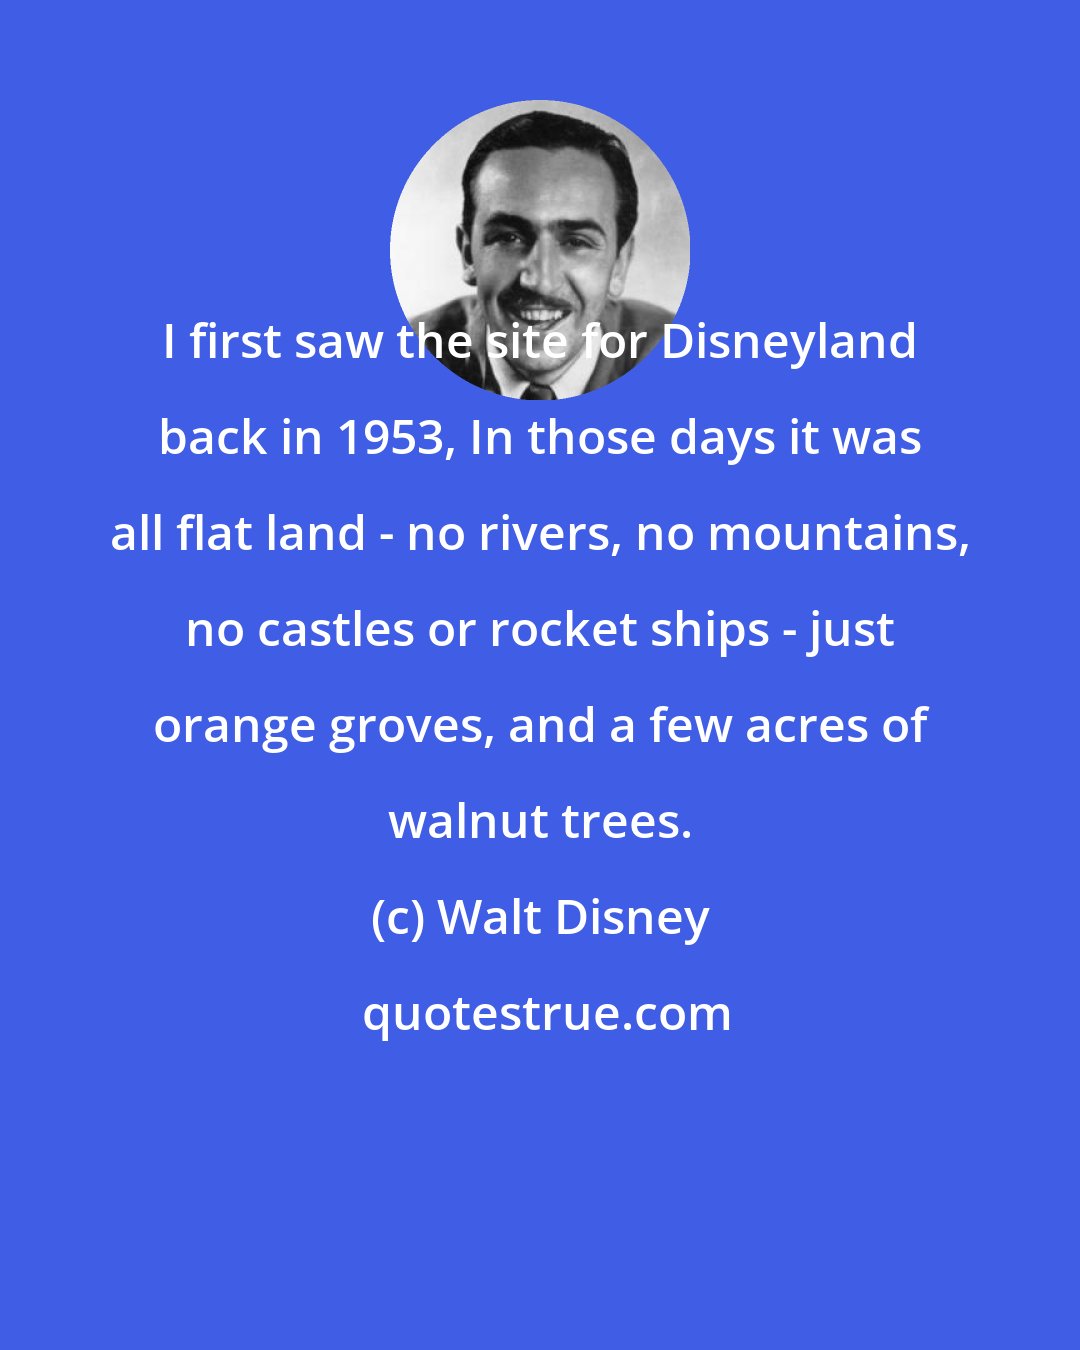 Walt Disney: I first saw the site for Disneyland back in 1953, In those days it was all flat land - no rivers, no mountains, no castles or rocket ships - just orange groves, and a few acres of walnut trees.